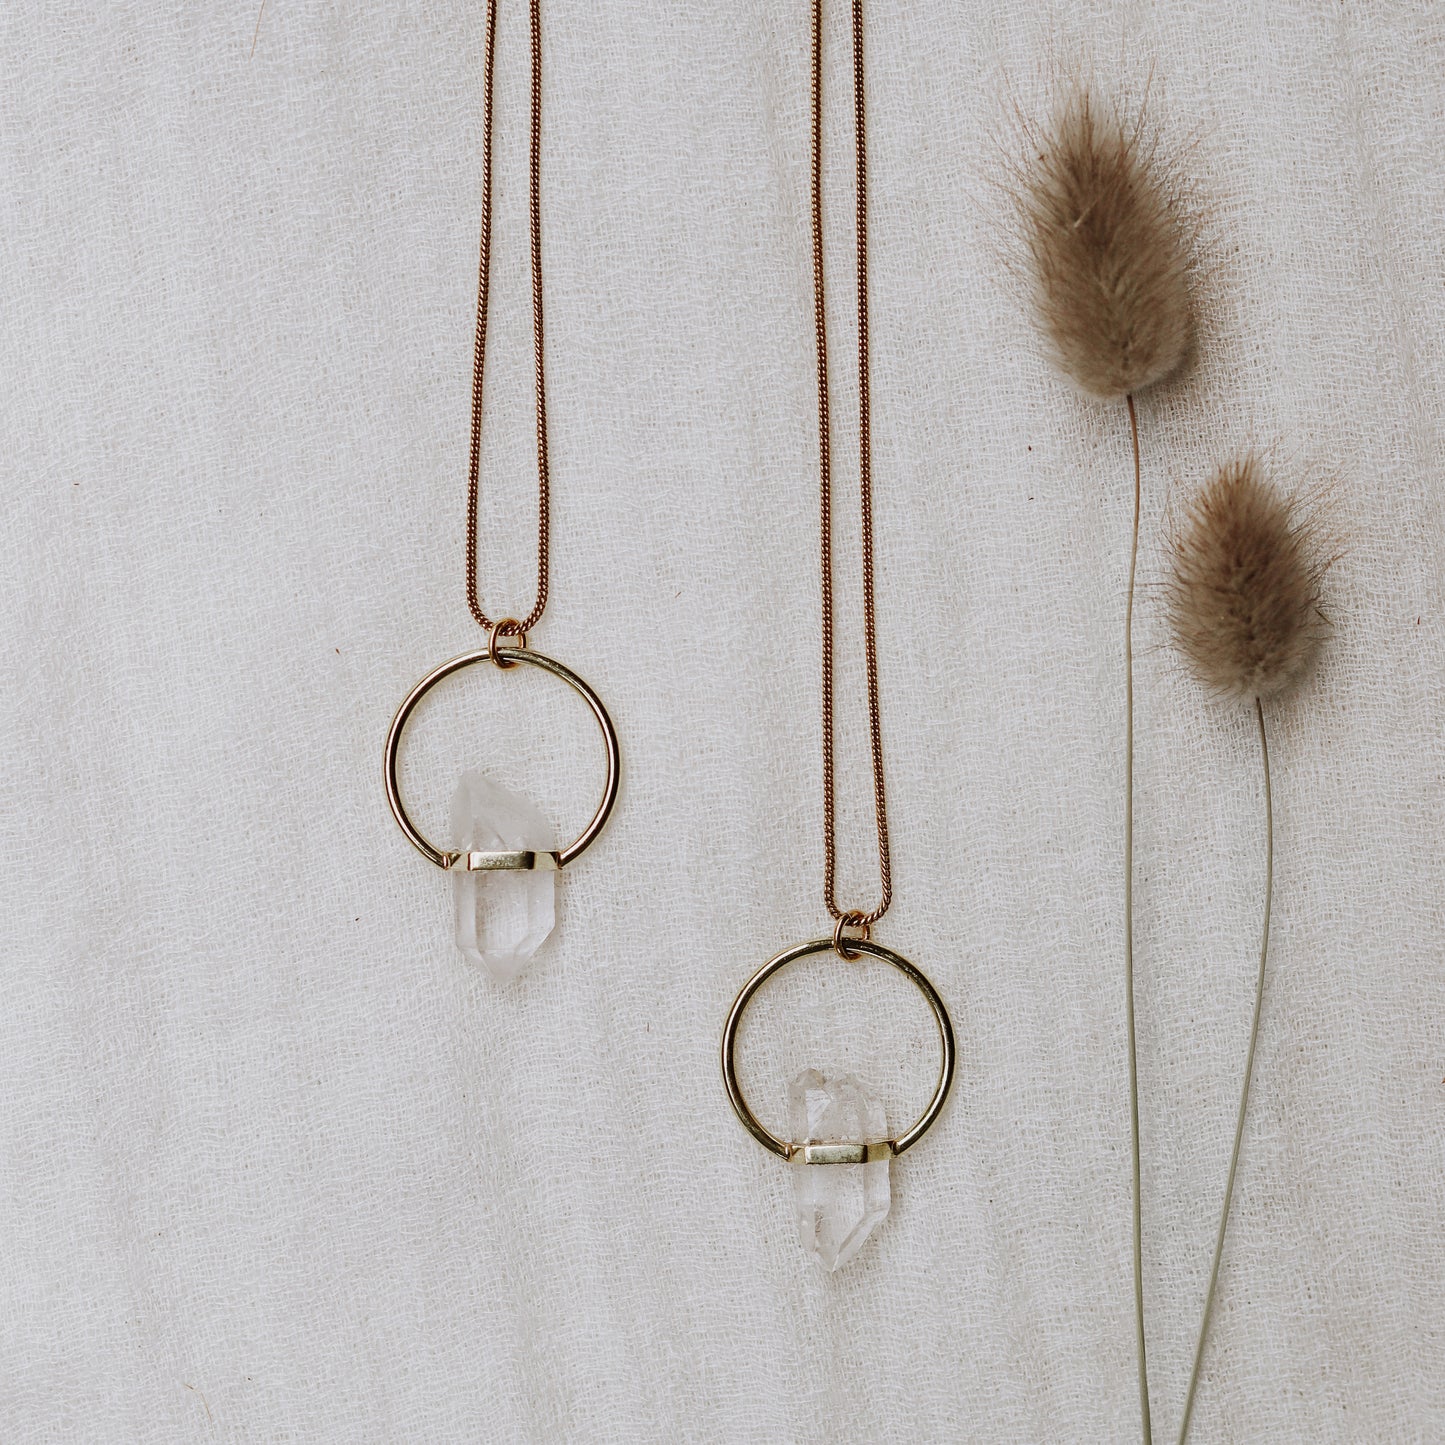 Citlali Necklace with Raw Clear Quartz